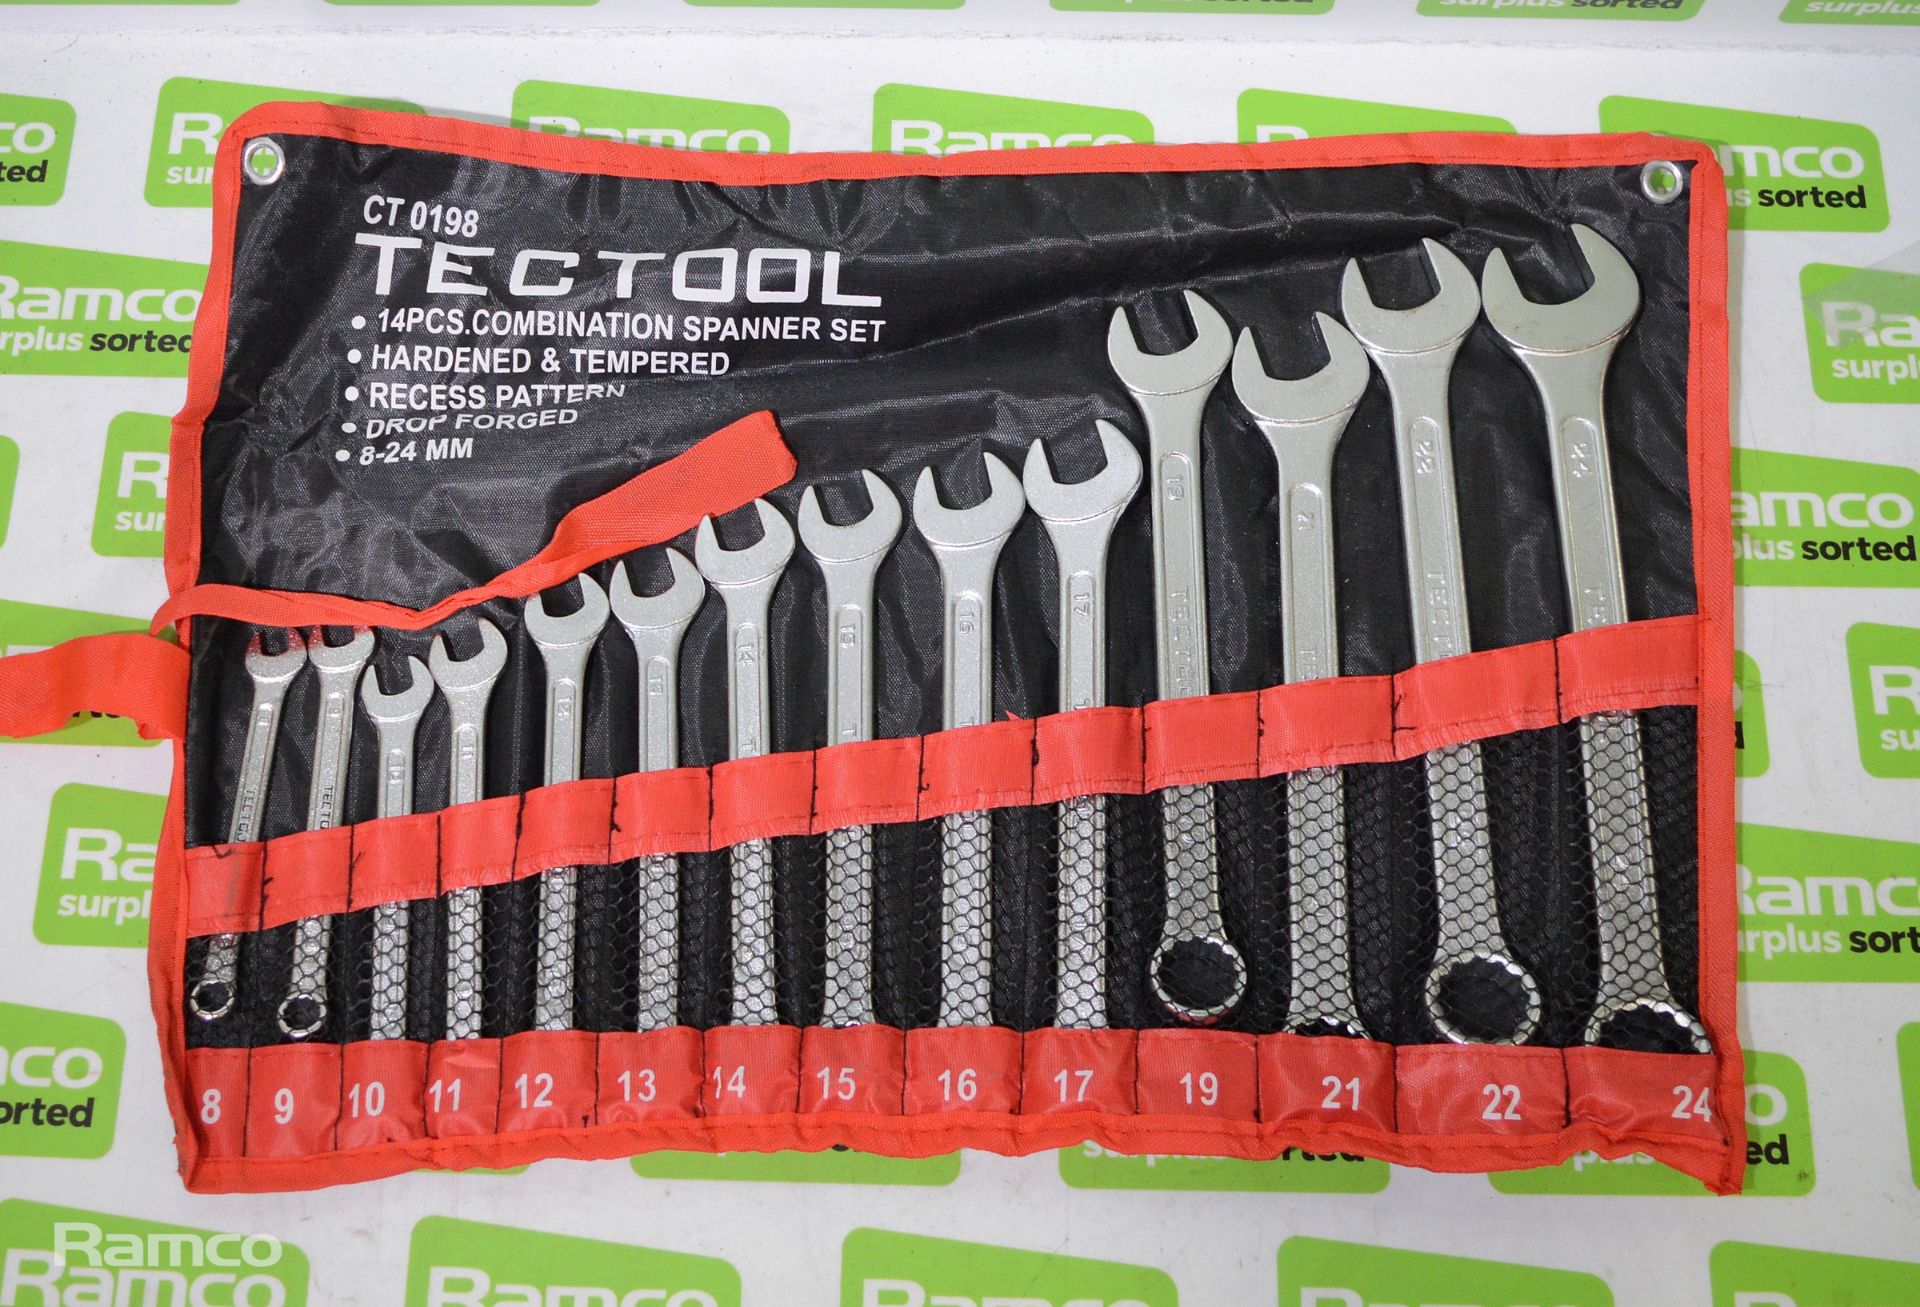 6x Tectool 14 piece combination spanner sets - Image 2 of 3